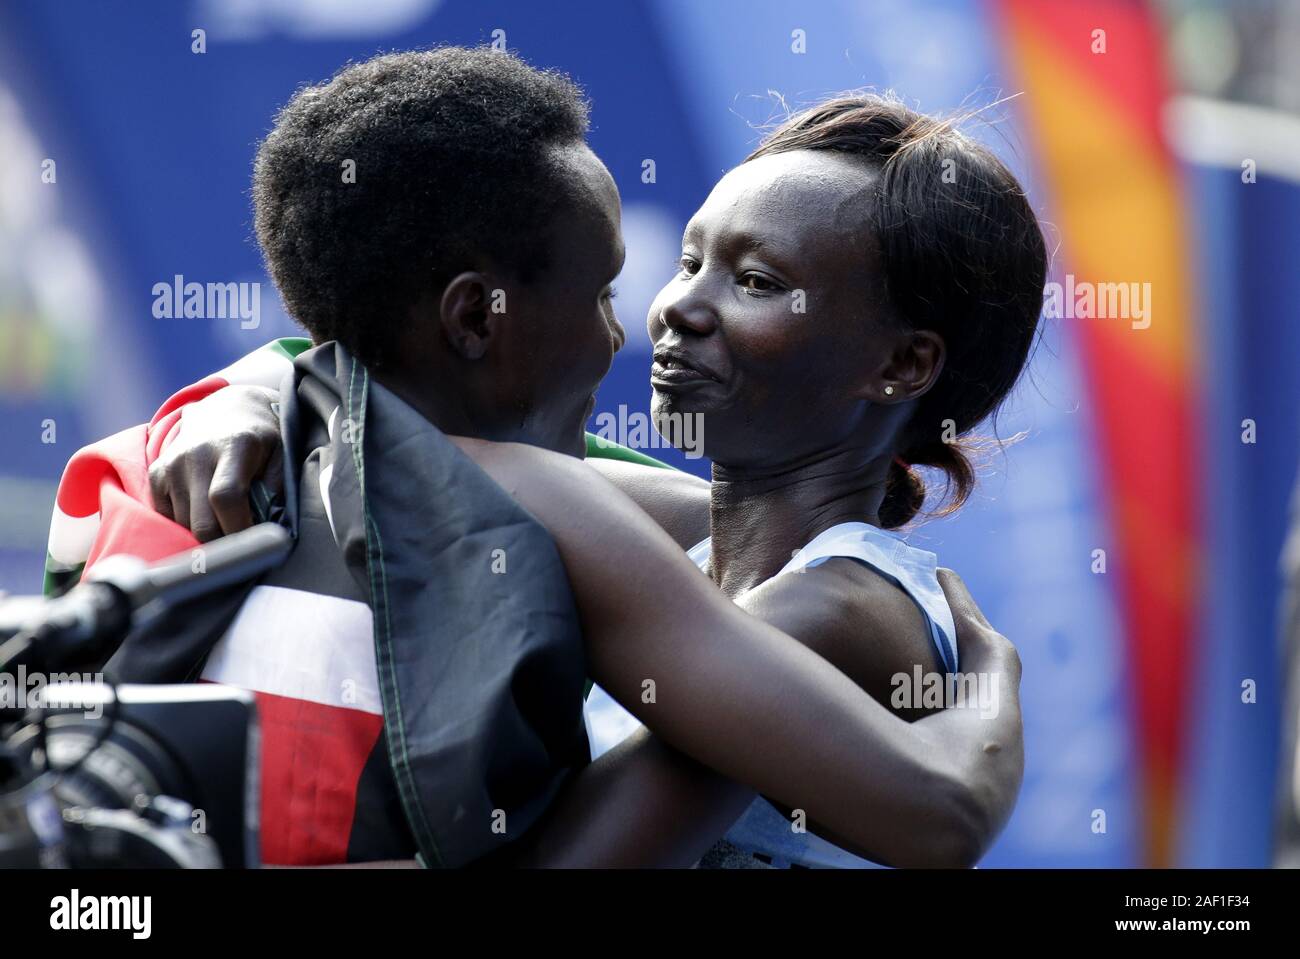 New York, United States. 12th Dec, 2019. Joyciline Jepkosgei of Kenya hugs 2nd place finisher Mary Keitany after winning the Women's 2019 NYRR TCS New York City Marathon in New York City on Sunday, November 3, 2019. Over 50,000 runners from New York City and around the world will race through the five boroughs on a course that winds its way from the Verrazano Bridge before crossing the finish line by Tavern on the Green in Central Park. Photo by John Angelillo/UPI Credit: UPI/Alamy Live News Stock Photo